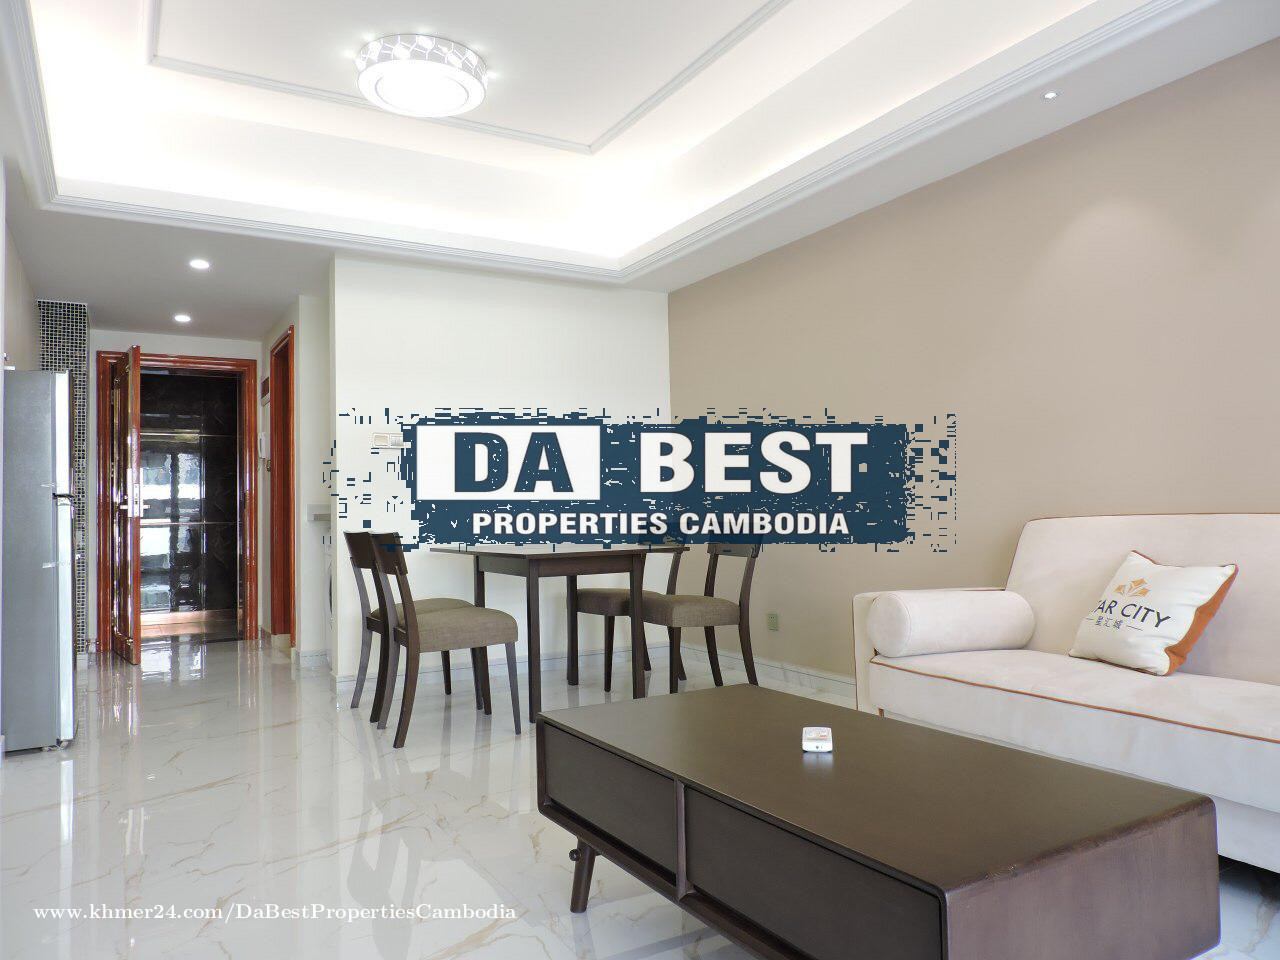 DABEST PROPERTIES: Brand new 1 Bedroom Apartment for Rent with Swimming pool in Phnom Penh-Sen Sok